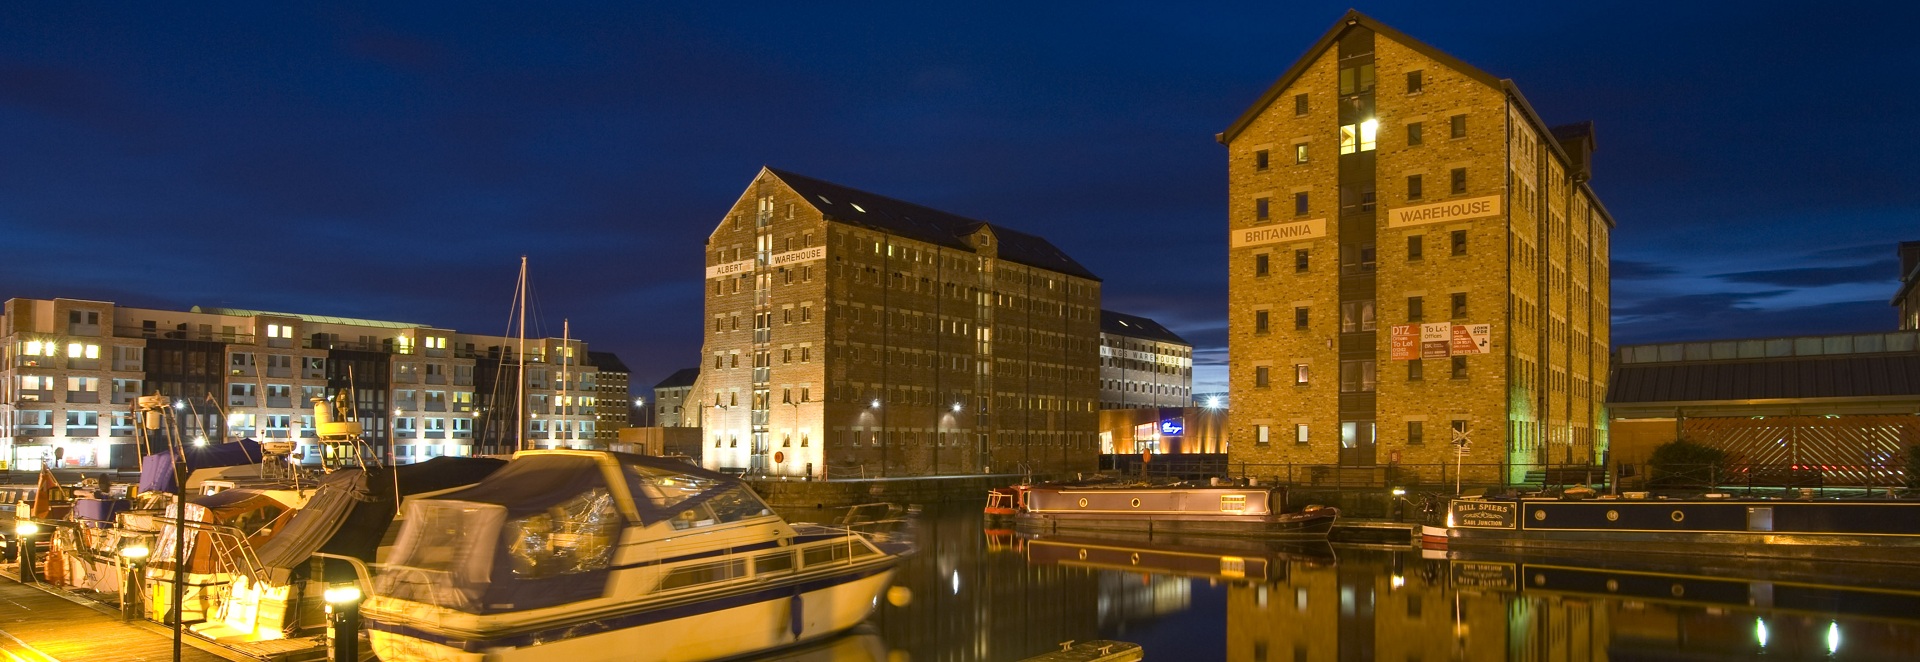 Night-time at Gloucester docks. The street lights pick out boats in the foreground. Converted warehouses stand in the background.